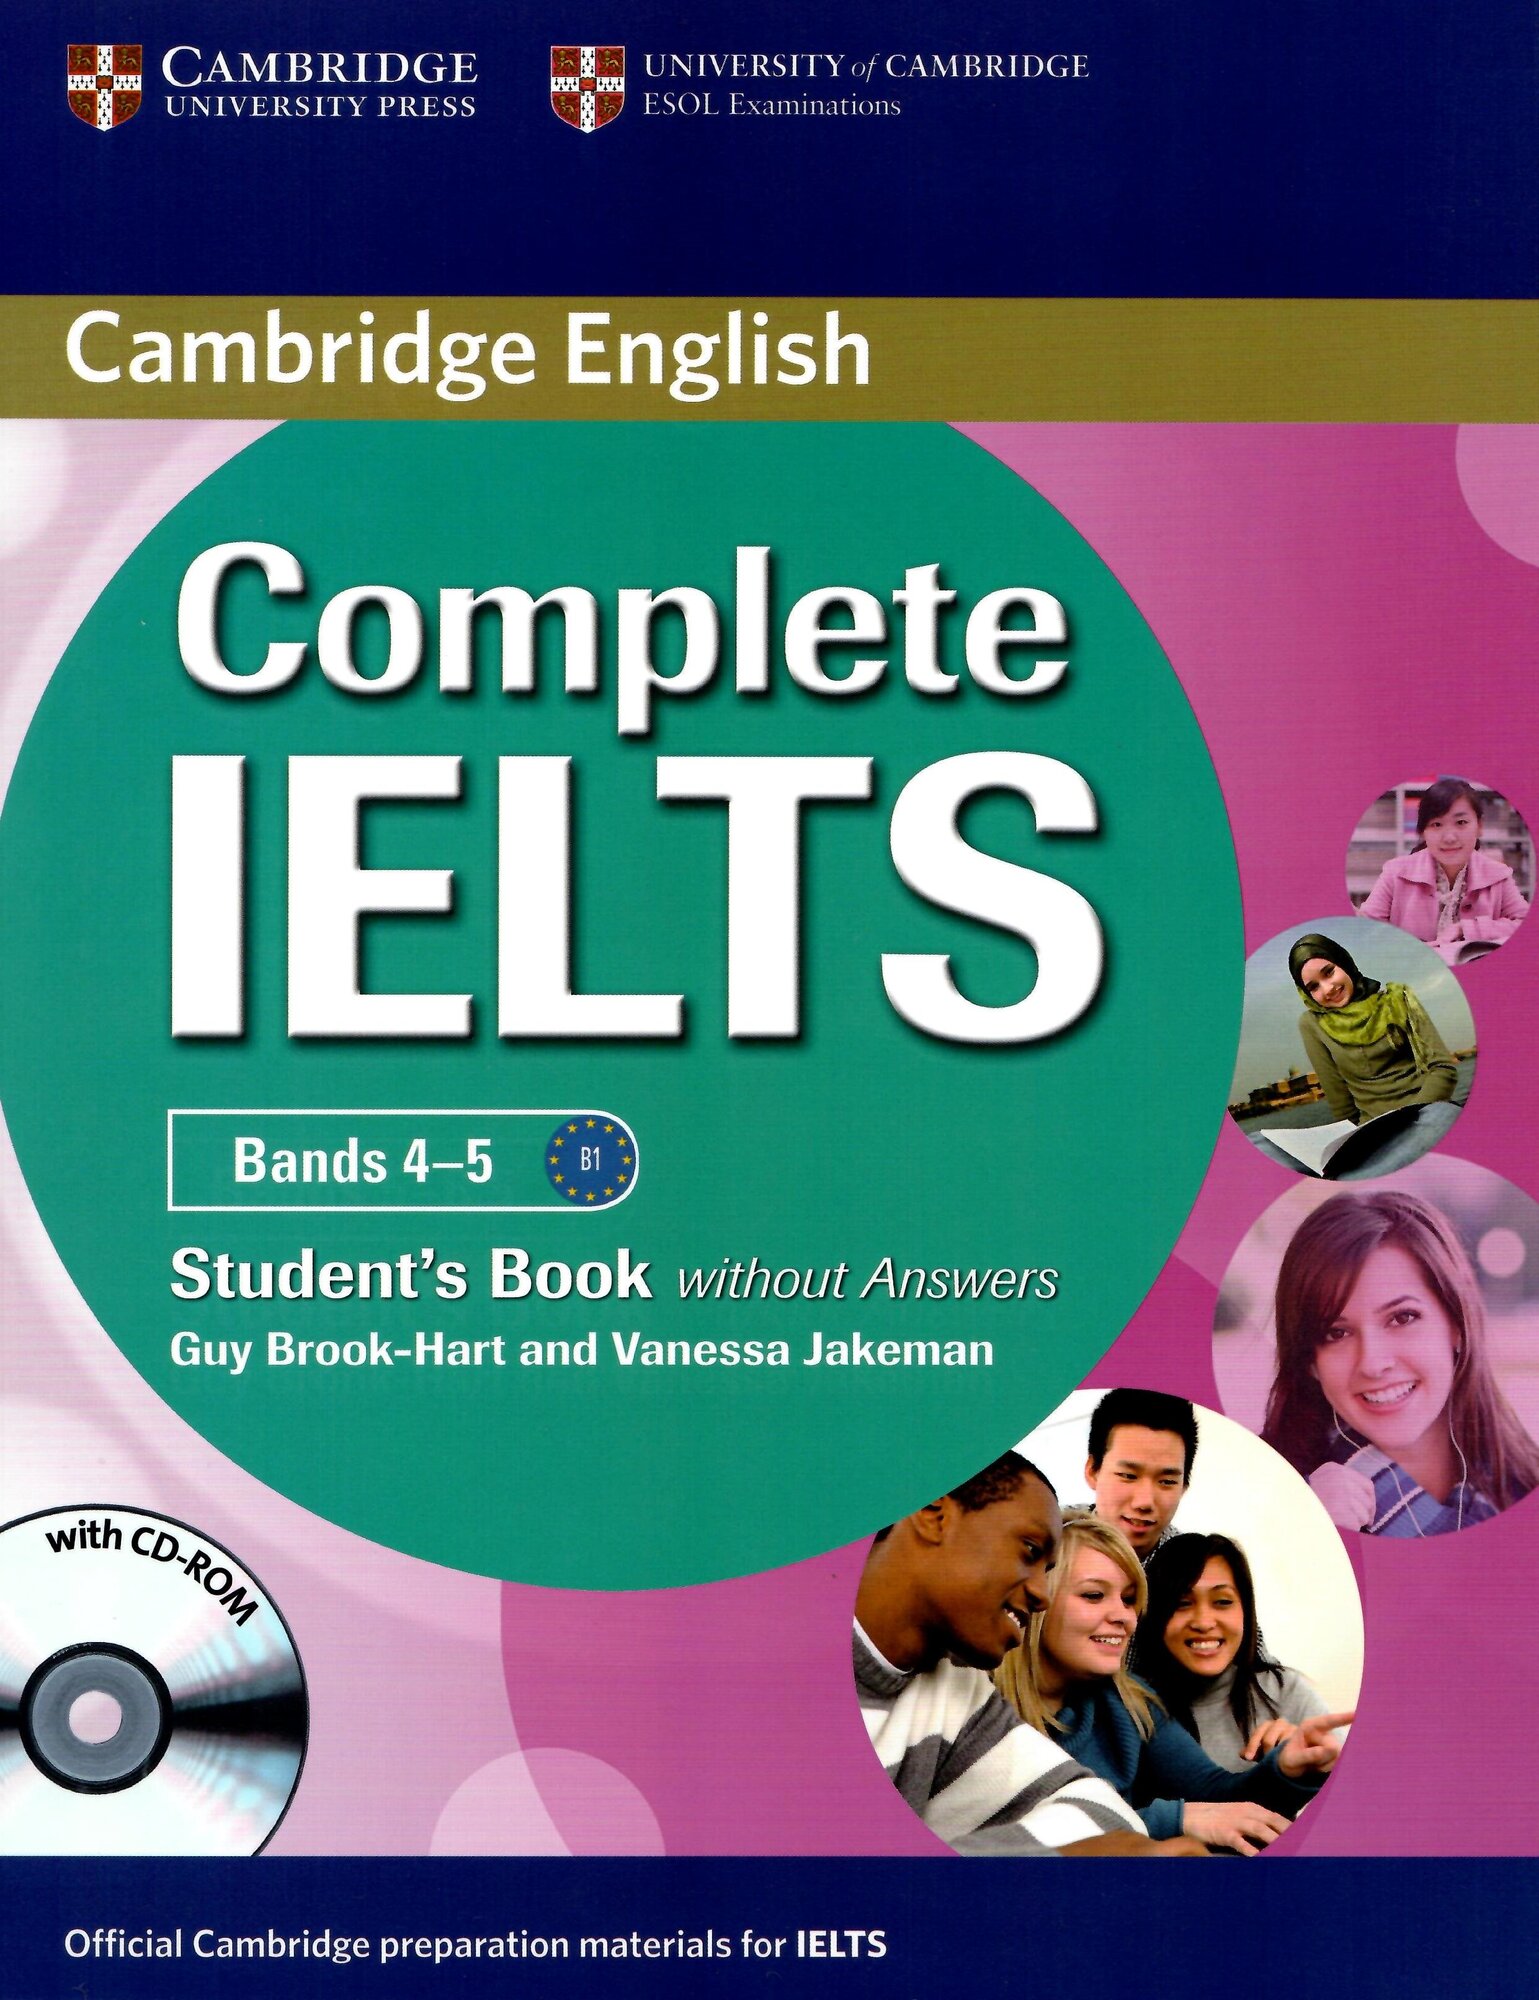 Complete IELTS Bands 4-5 Student's Book without Answers with CD-ROM